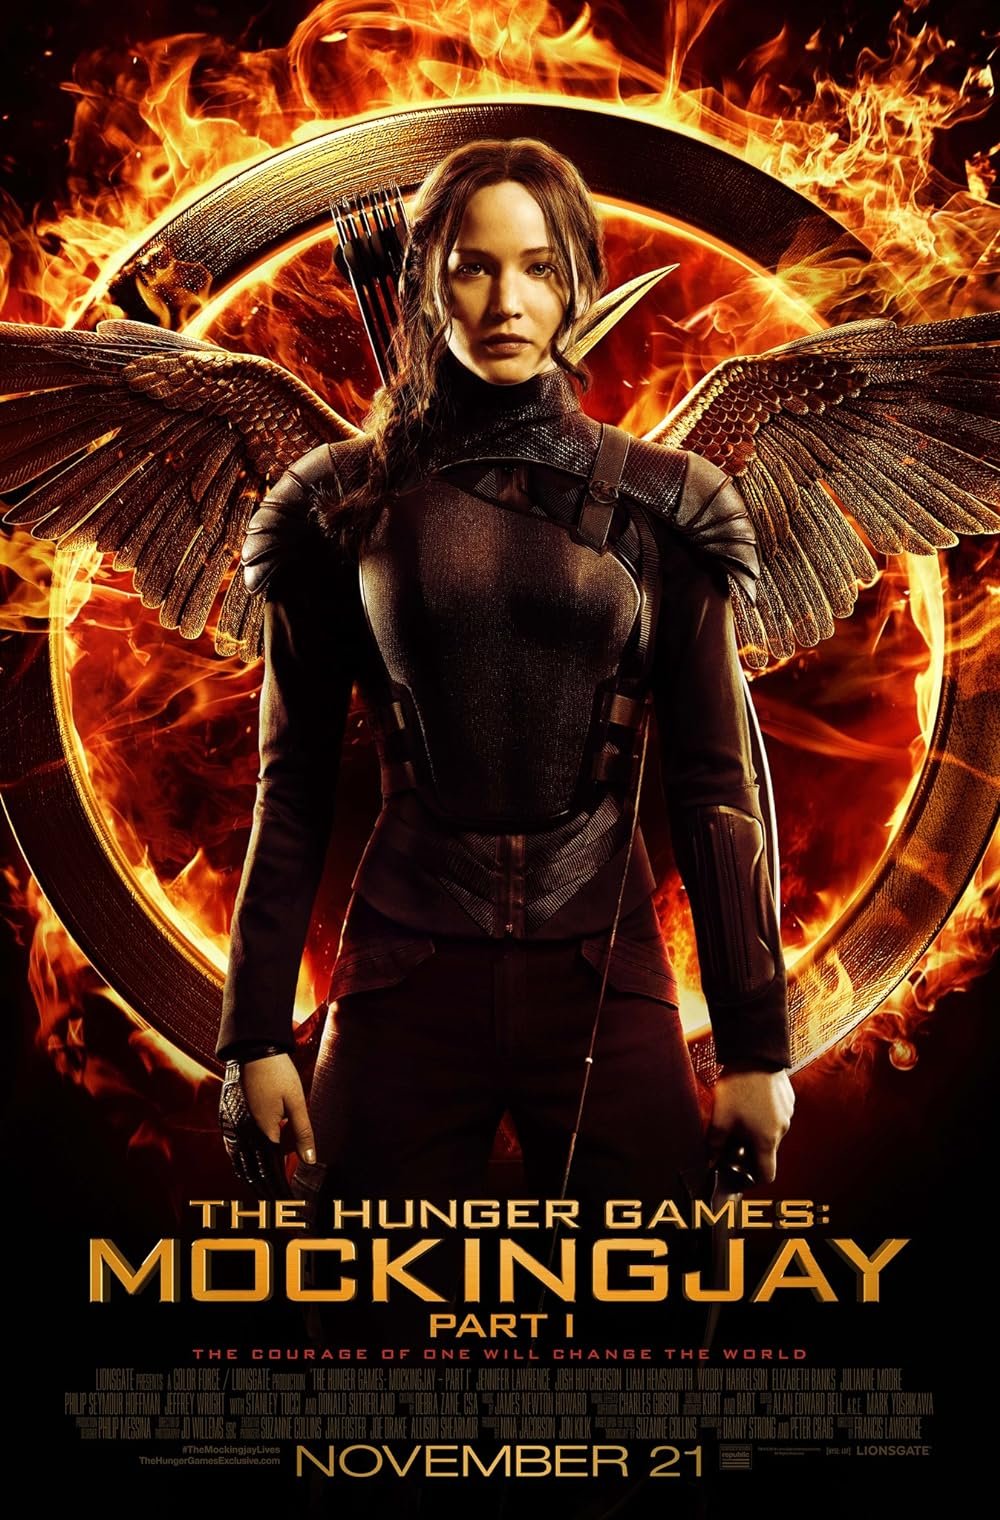 Download The Hunger Games Mockingjay Part 1 (2014) Hindi Dubbed [Dual Audio] BluRay 1080p 720p 2160 4k HD [Full Movie]